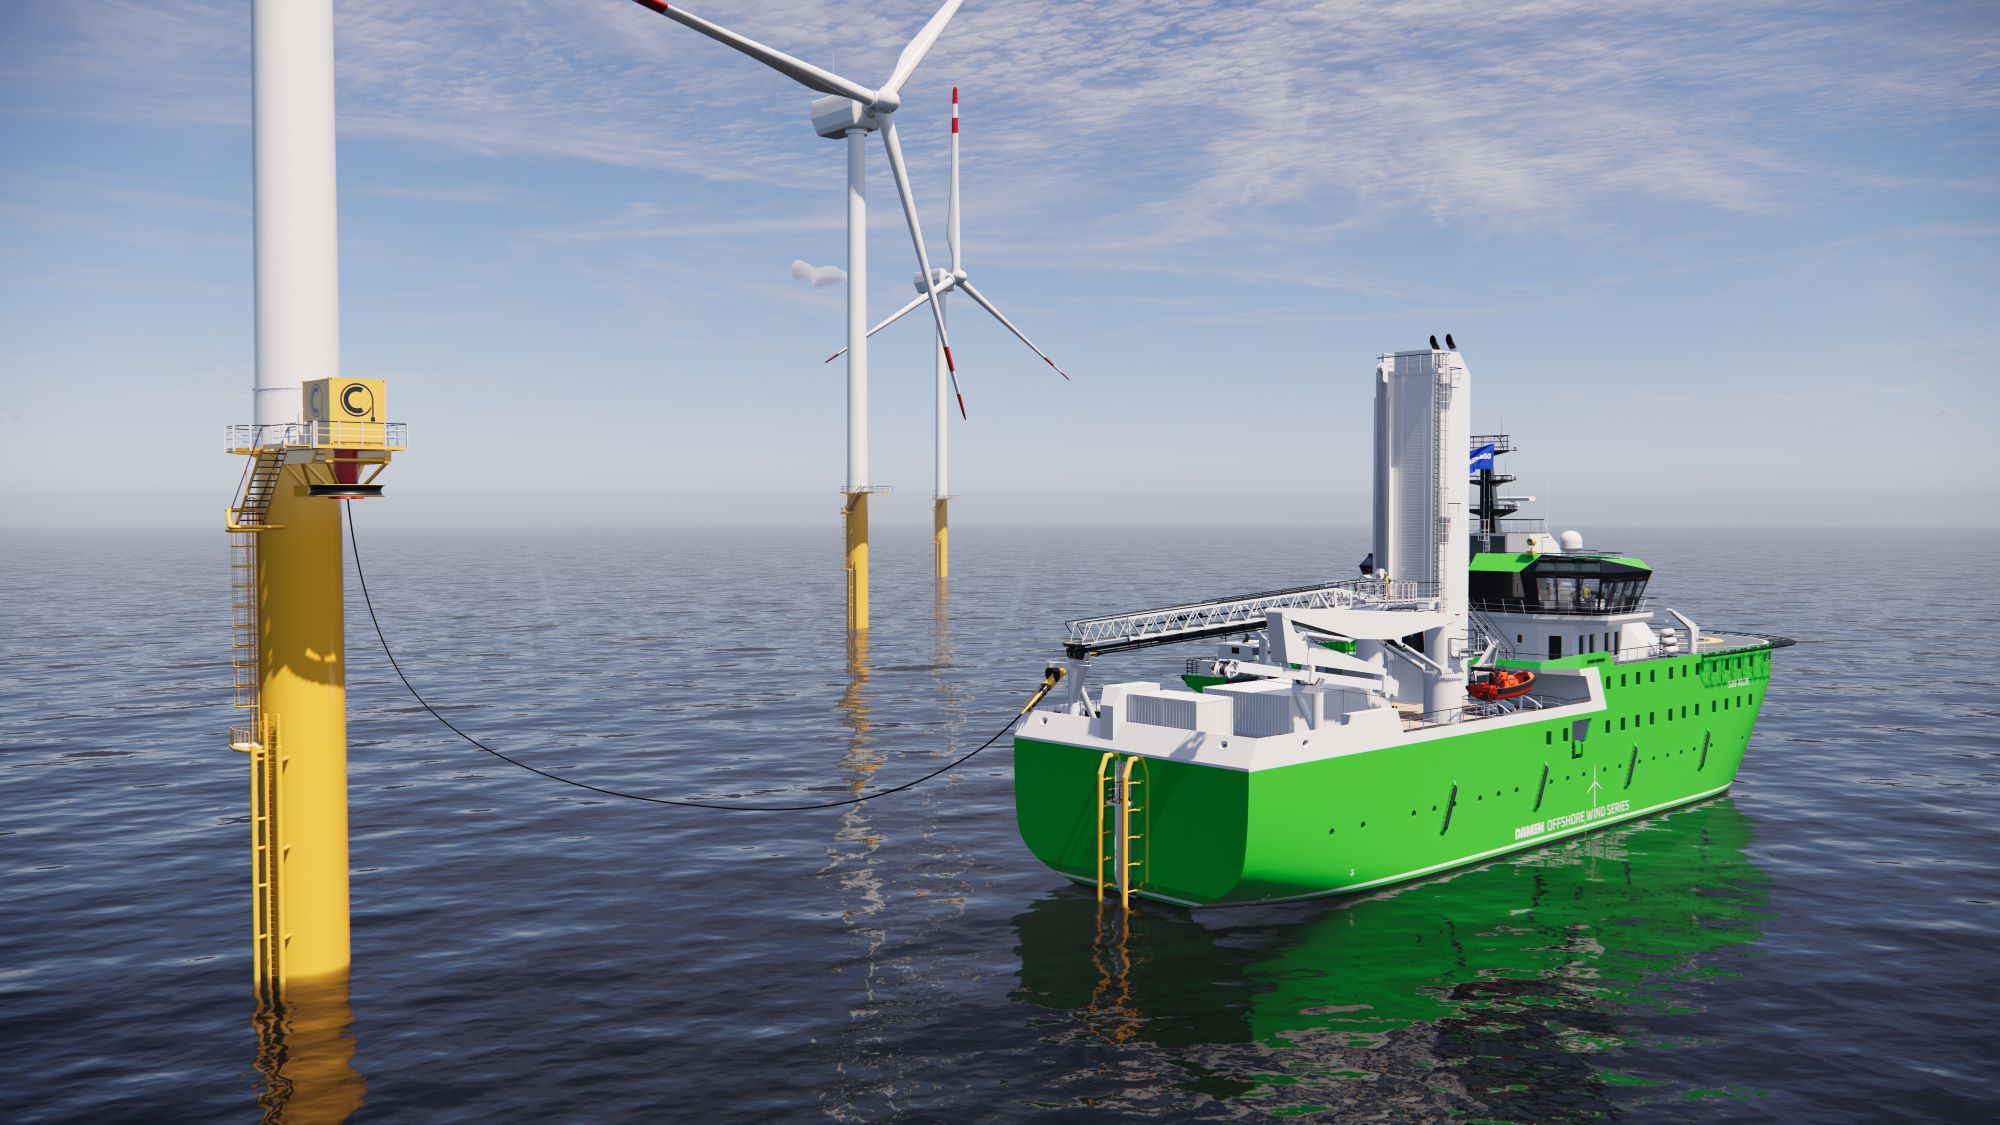 Damen introduces fully electric SOV with offshore charging